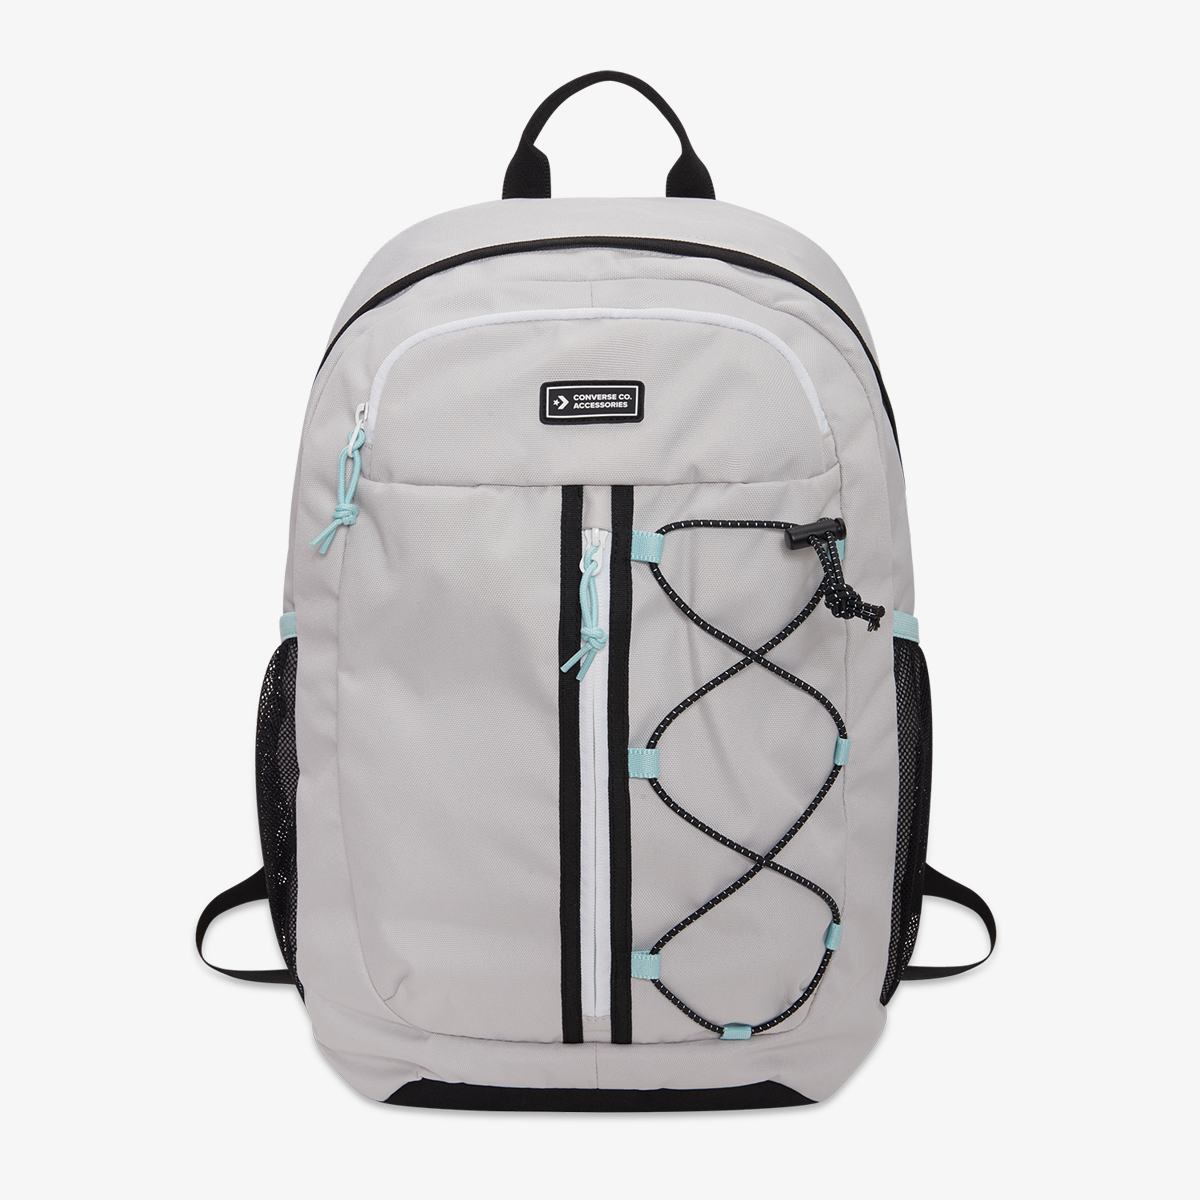 Рюкзак Converse Transition Backpack